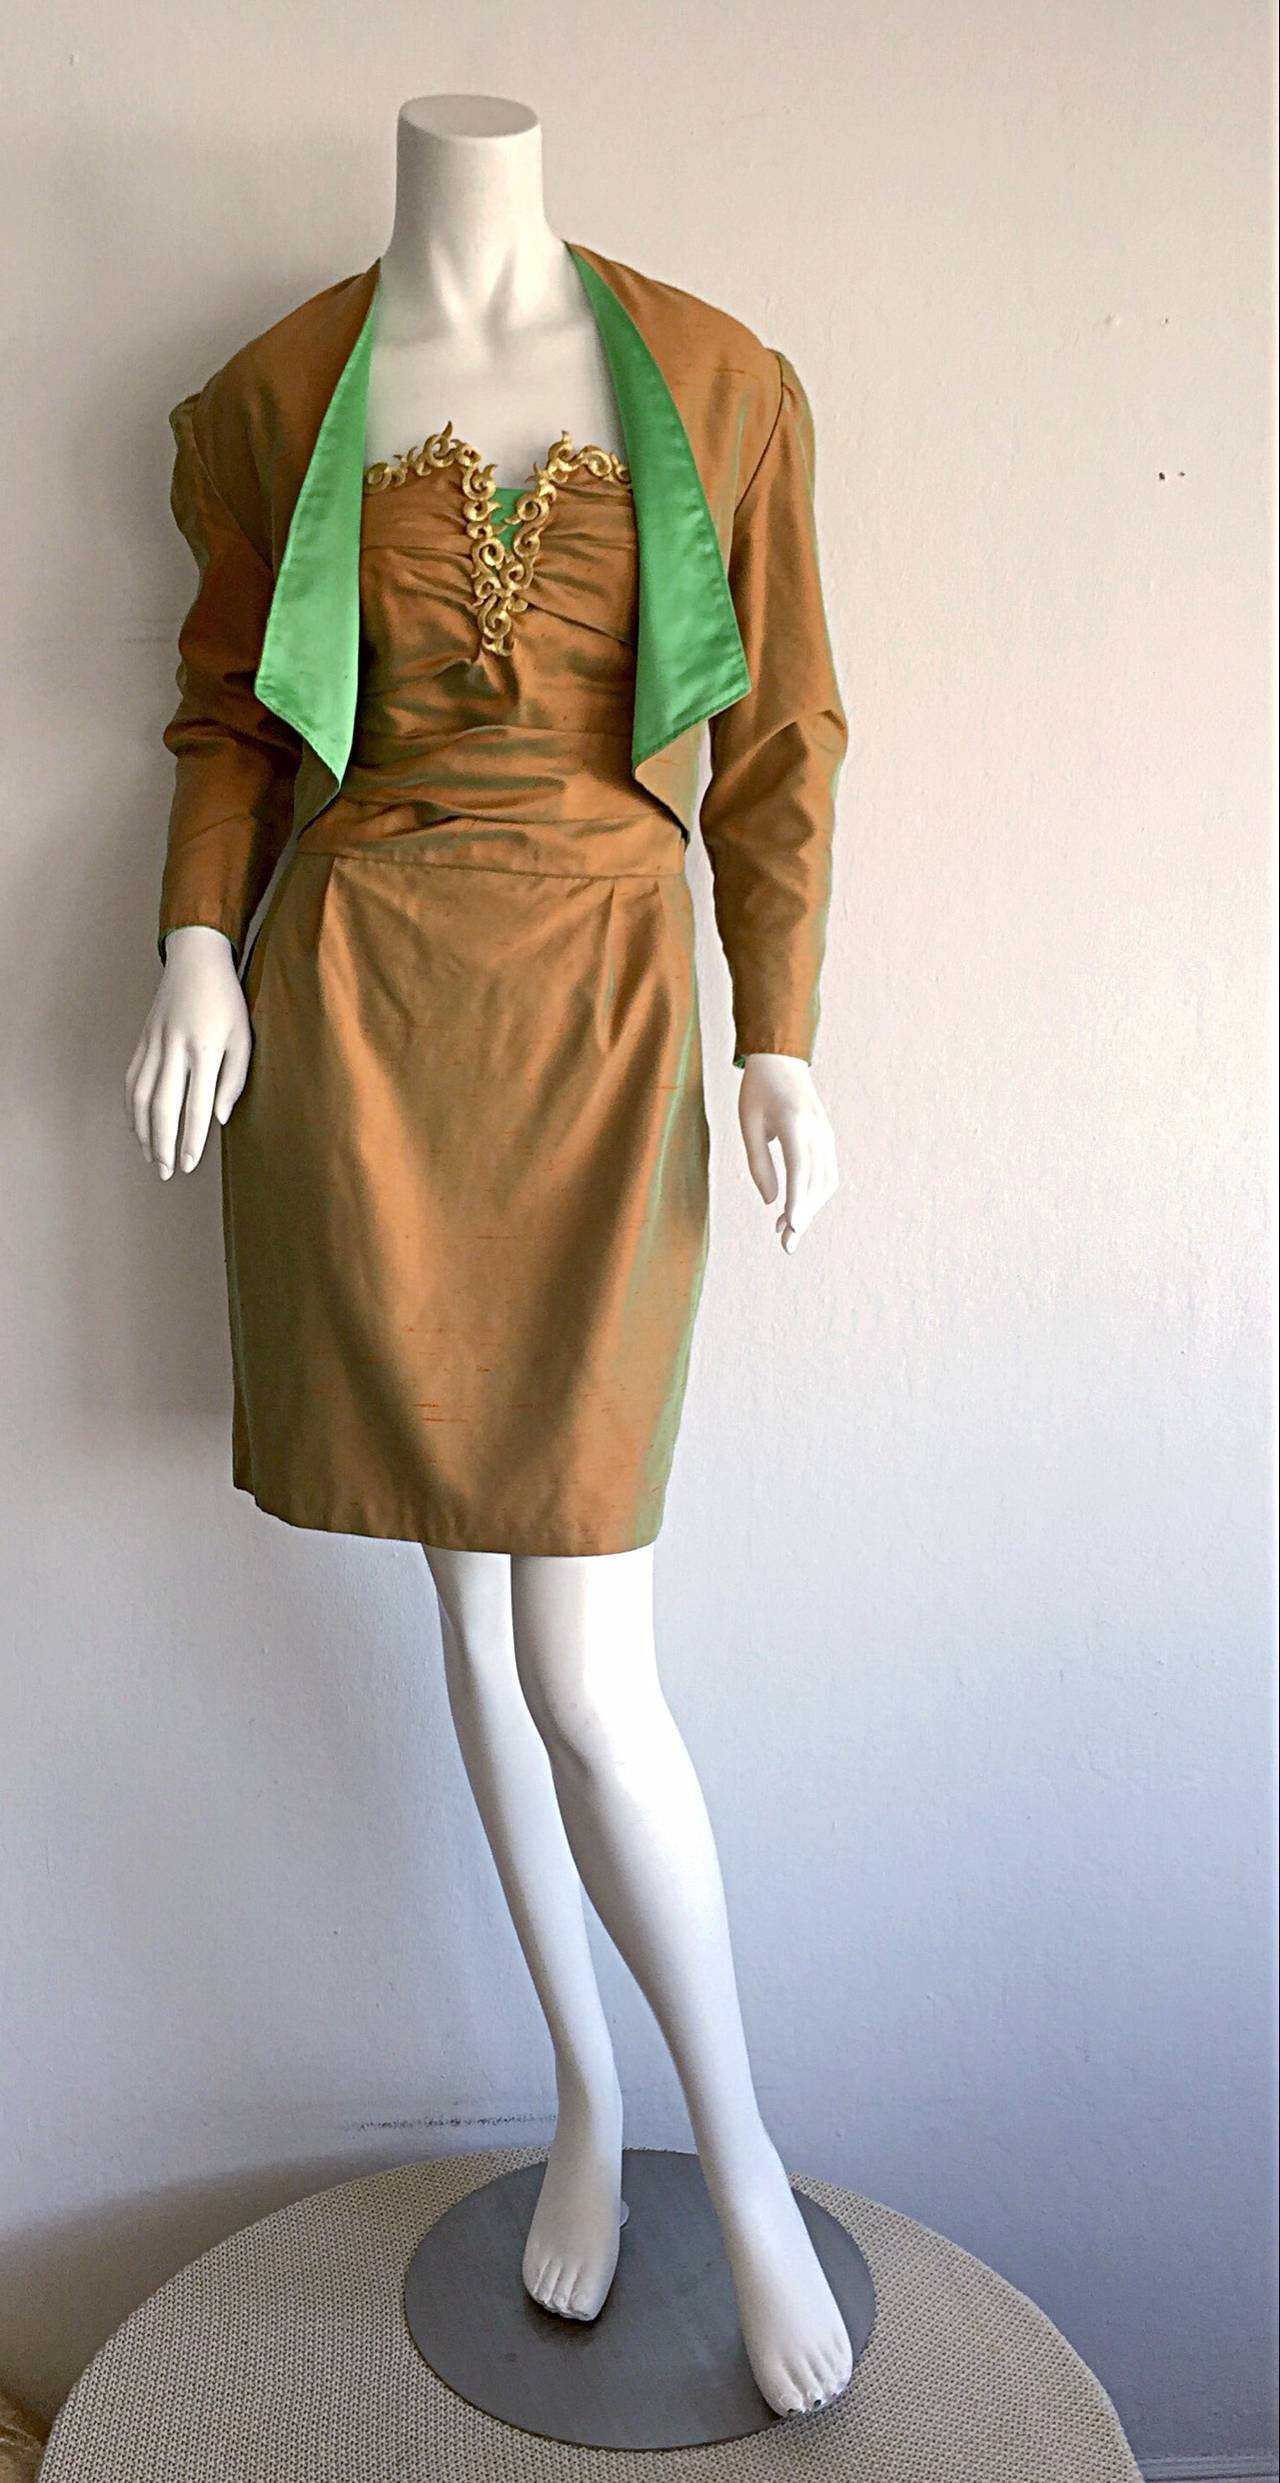 Exceptional vintage couture ensemble! Impeccable workmanship! Couture quality. Wonderful silk iridescent strapless dress, with Grecian inspired gold metallic trim.  Matching cropped bolero, lined in matching green silk. Hidden zipper up back of